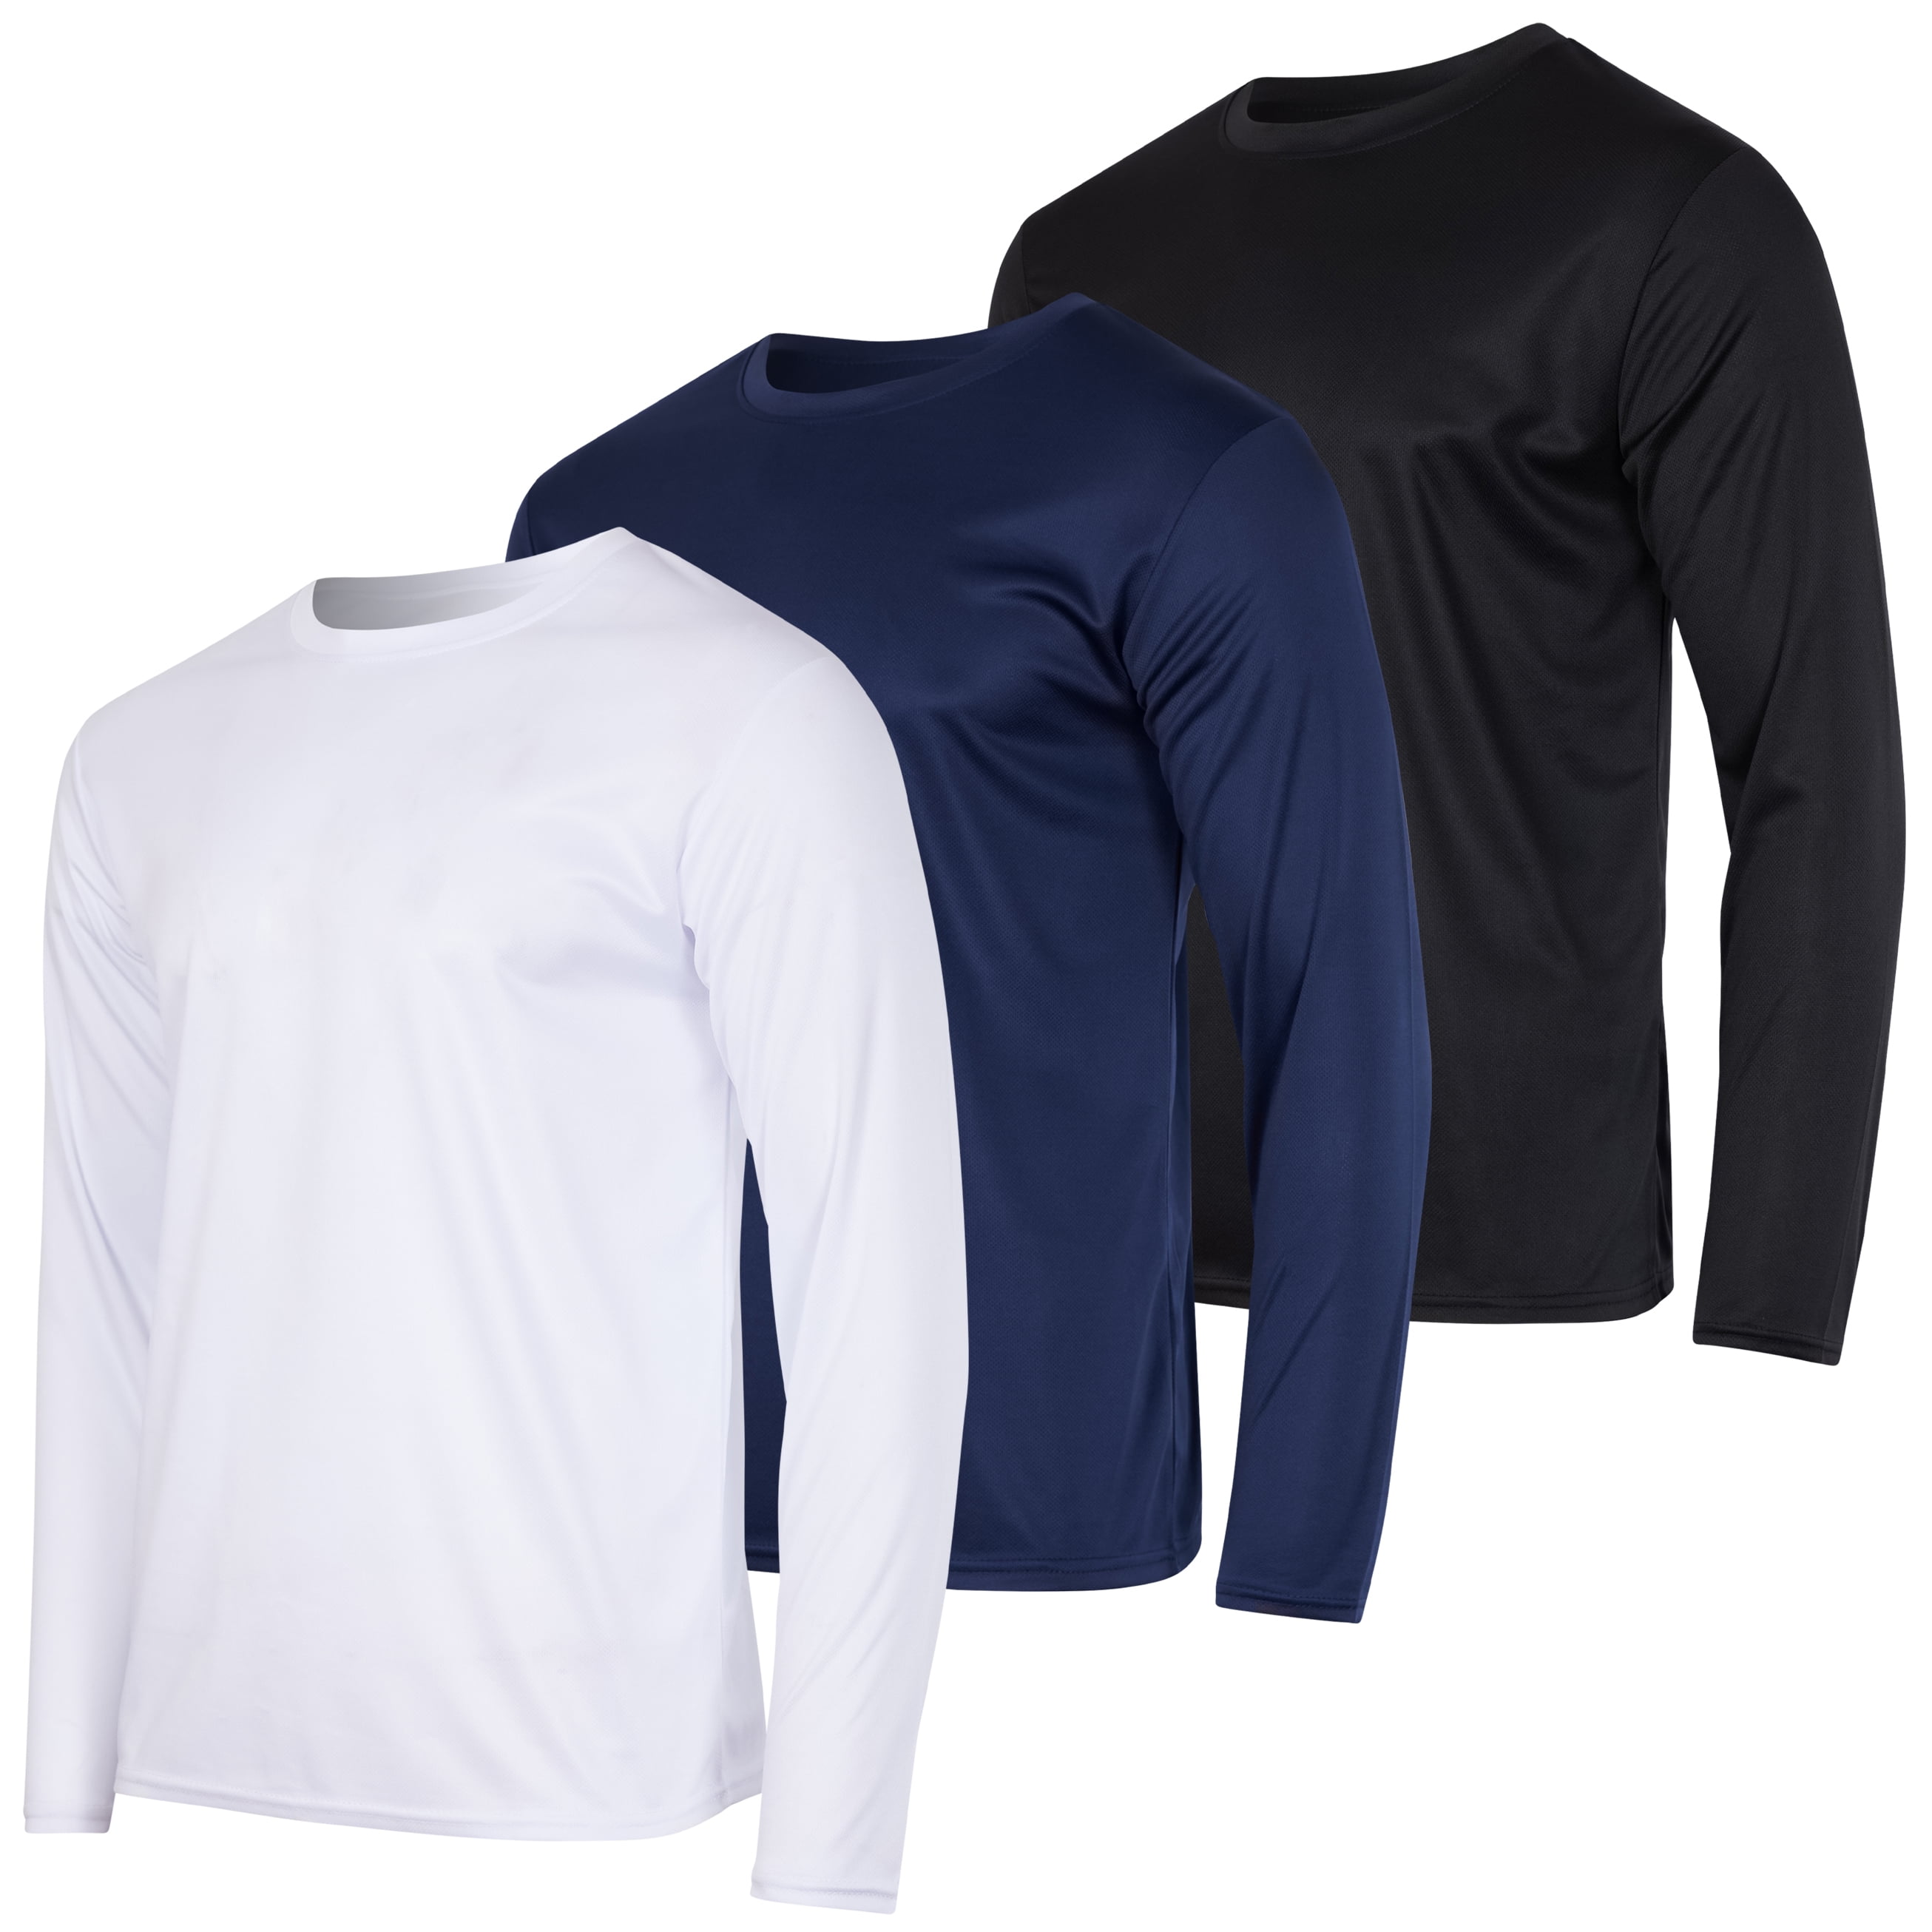 4 Pack Men's Dry-Fit Moisture Wicking Performance Long Sleeve T-Shirt UV Sun Protection Outdoor Active Athletic Crew Top 